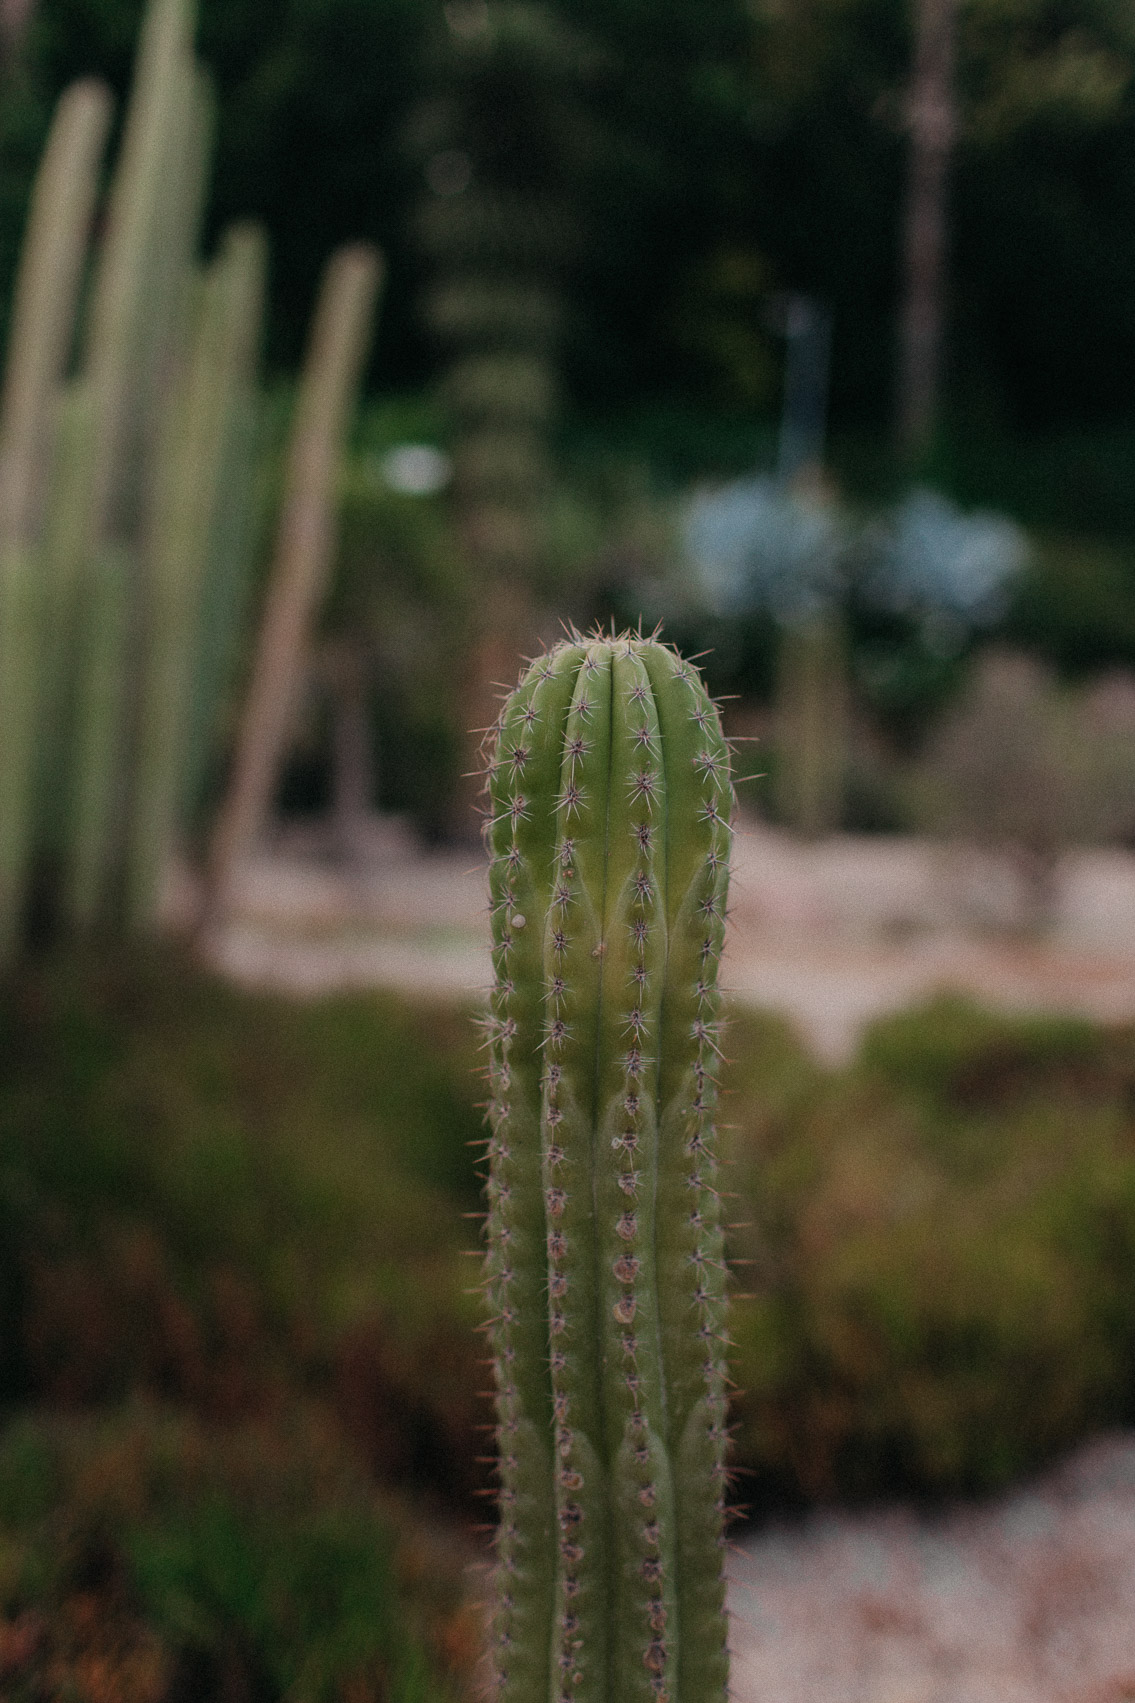 Barcelona cactus garden - The cat, you and us